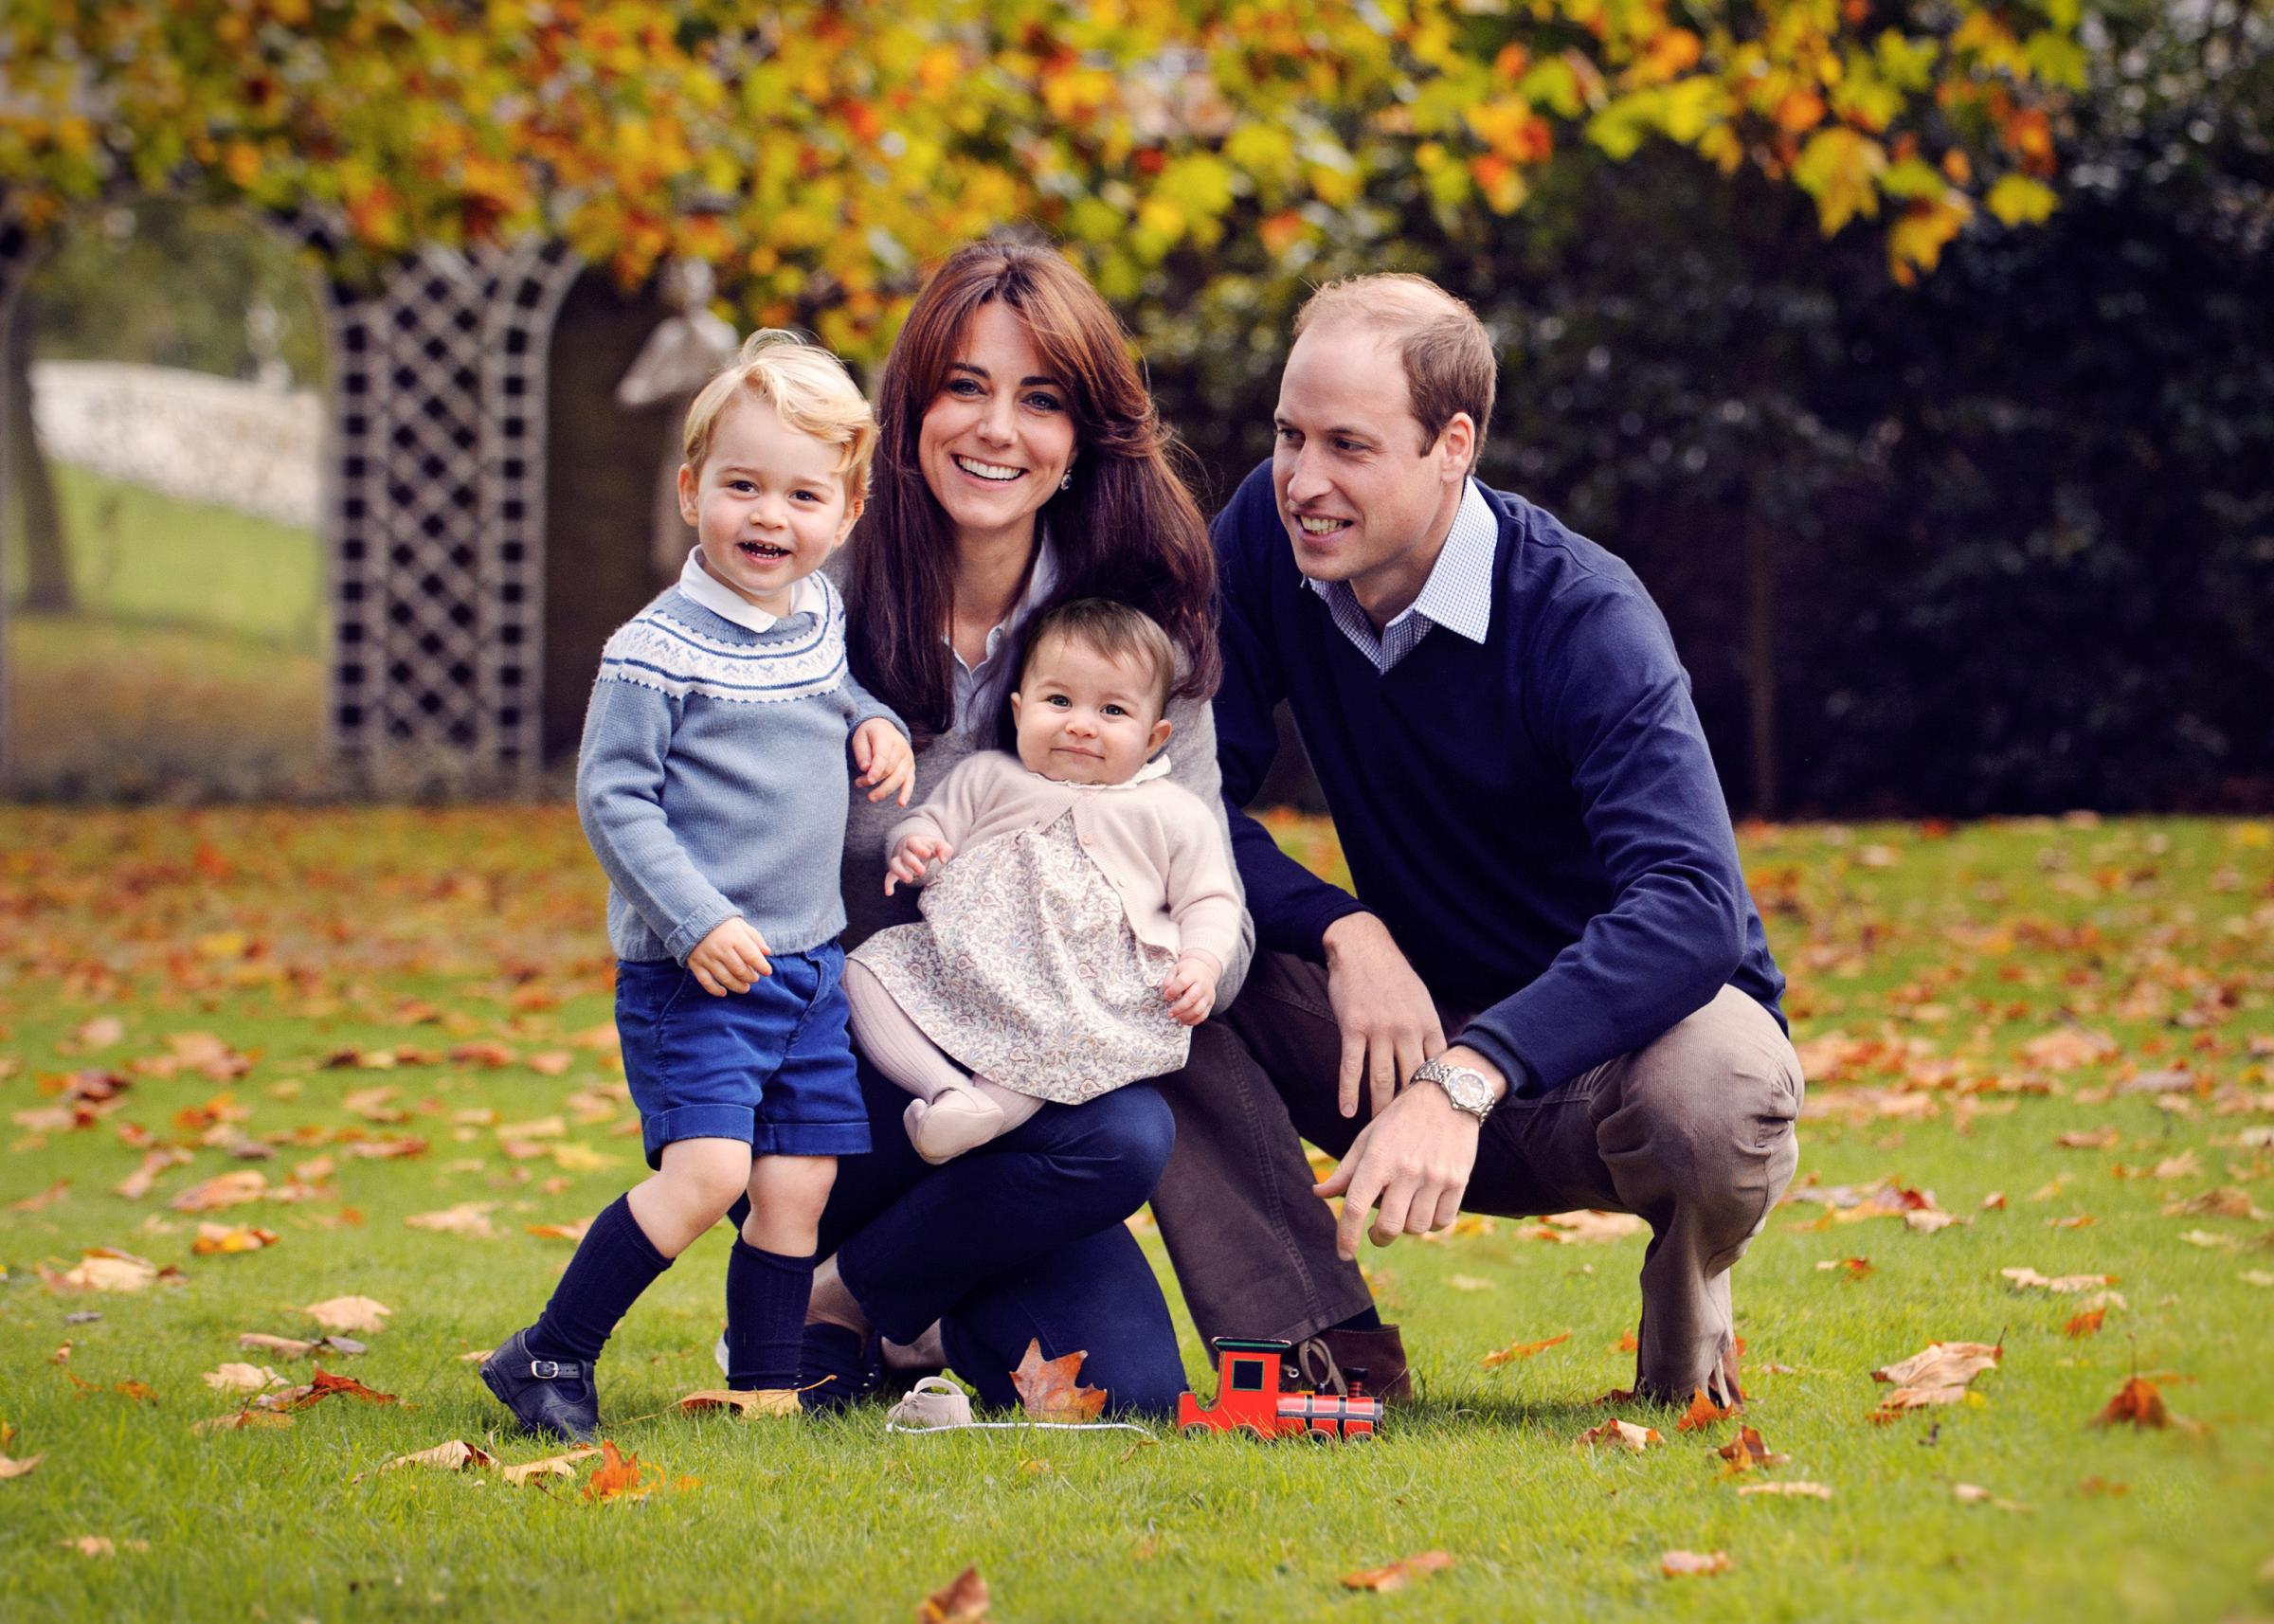 In this October handout image provided by Kensington Palace on Dec. 18, 2015, Prince William, Duke of Cambridge, and Catherine, Duchess of Cambridge, pose for a portrait with their children, Prince George and Princess Charlotte.